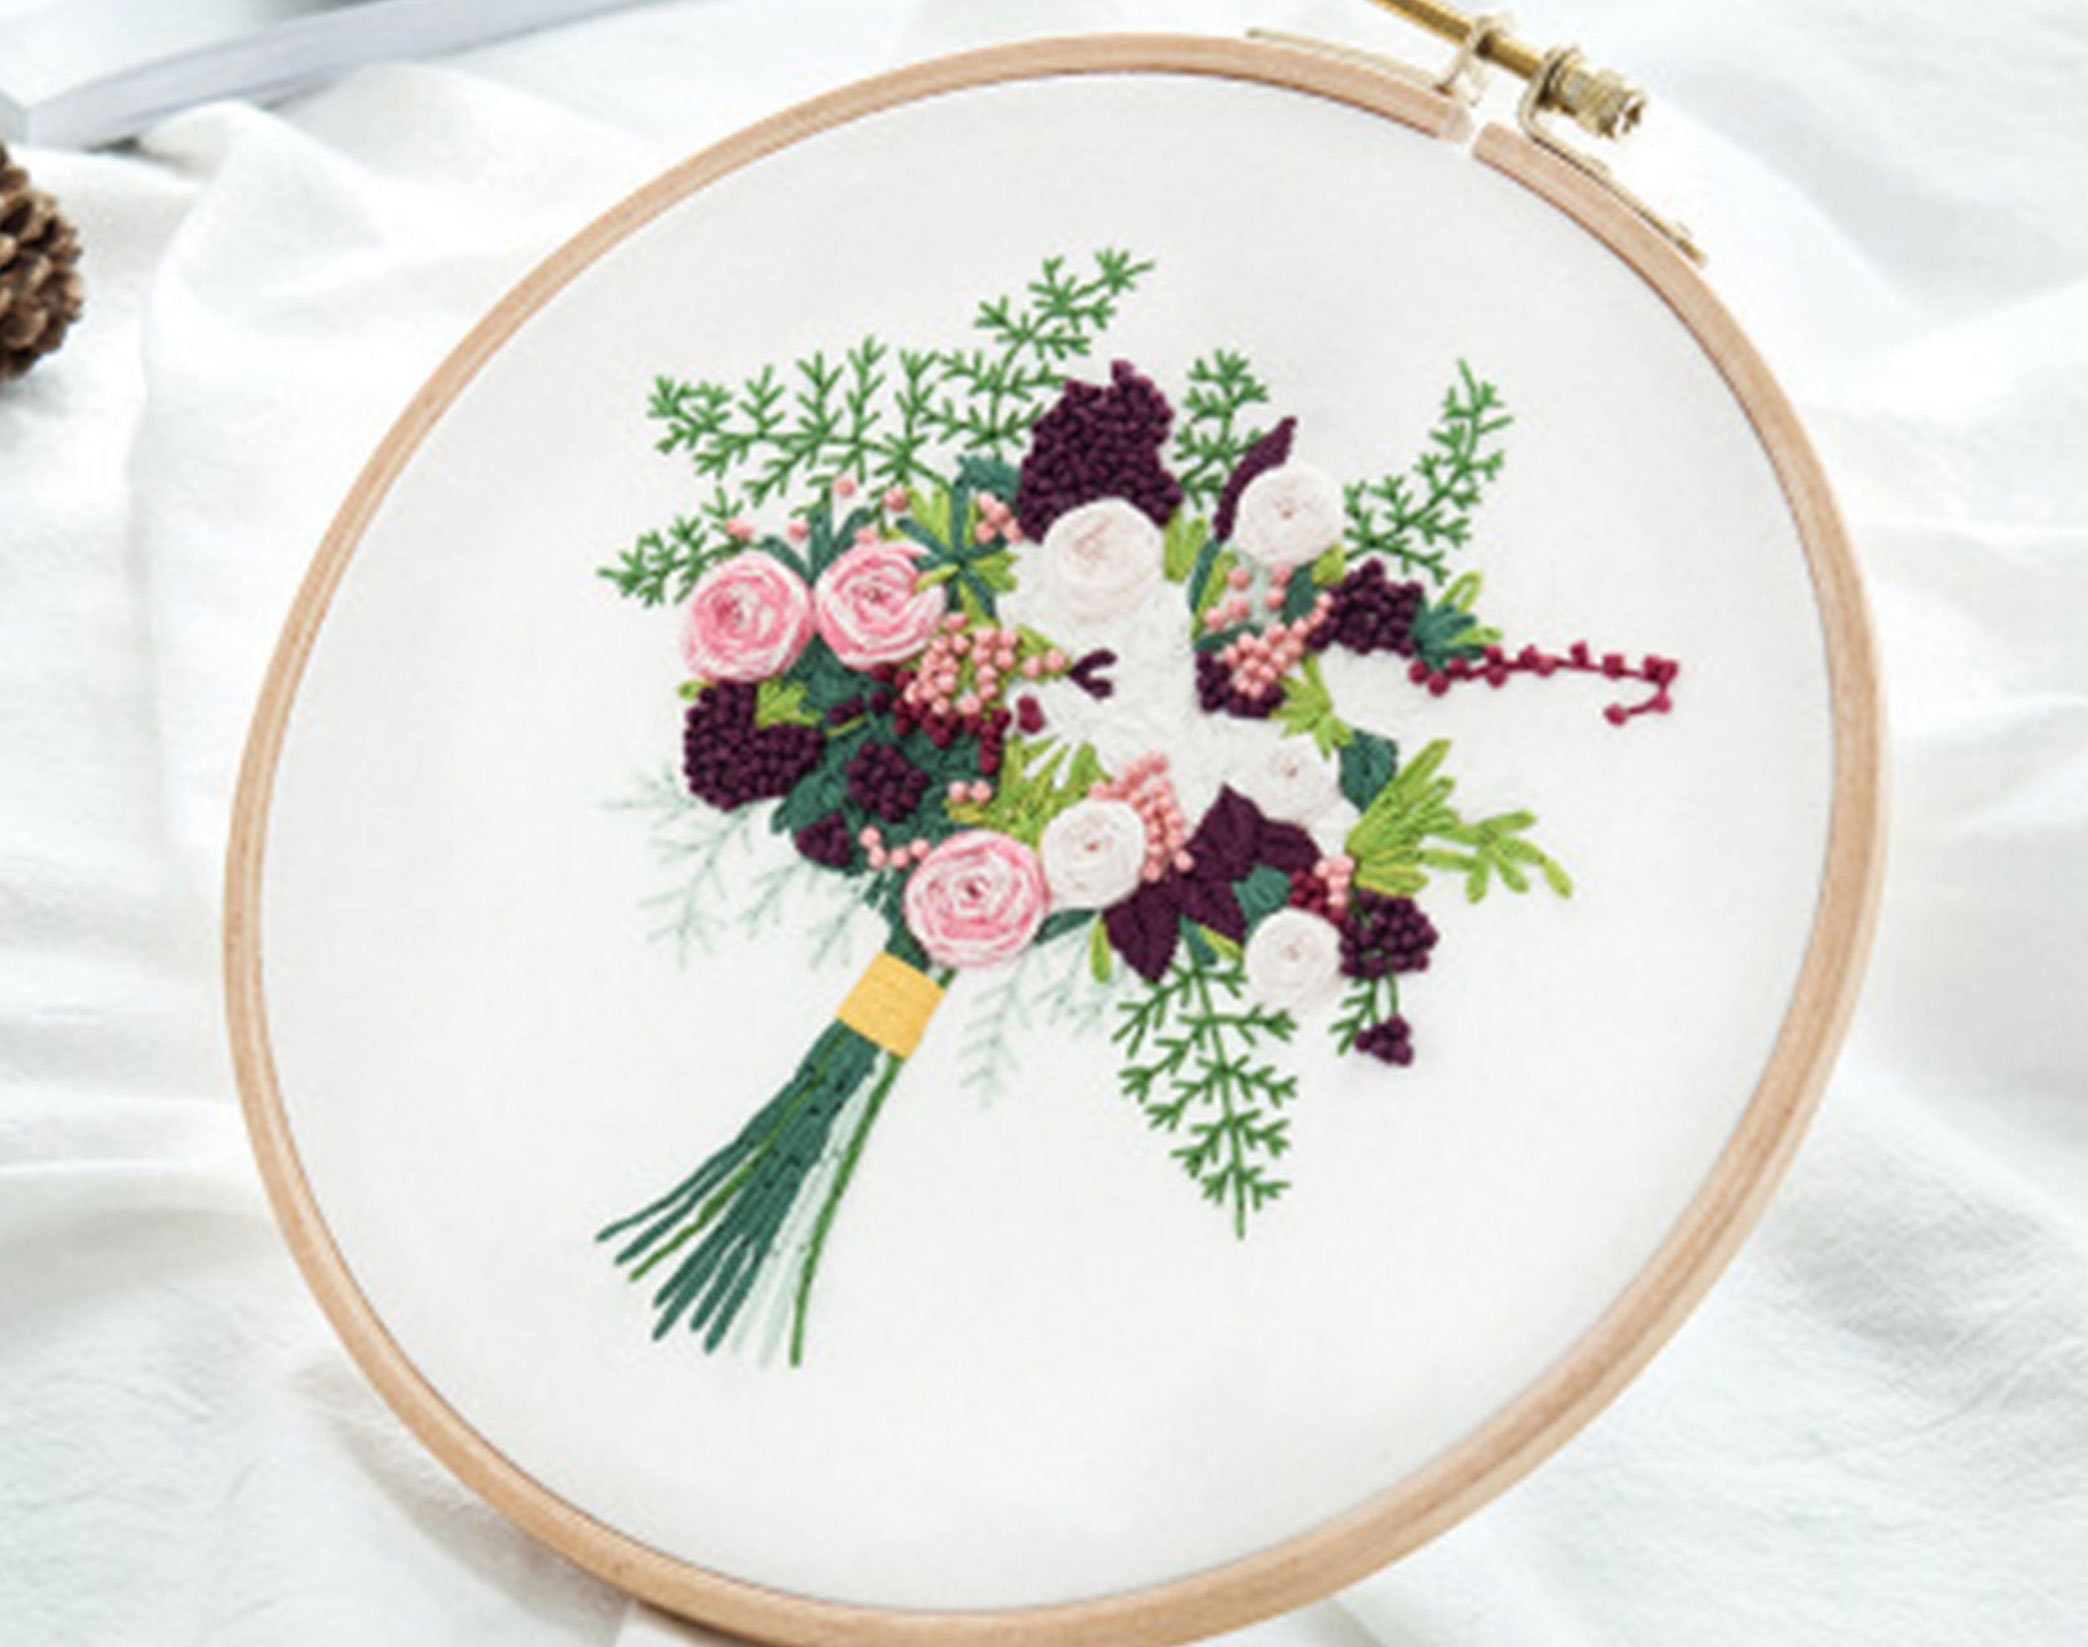 zxbaers 3 Set Embroidery Kit for Beginners Adults, Flower Pattern